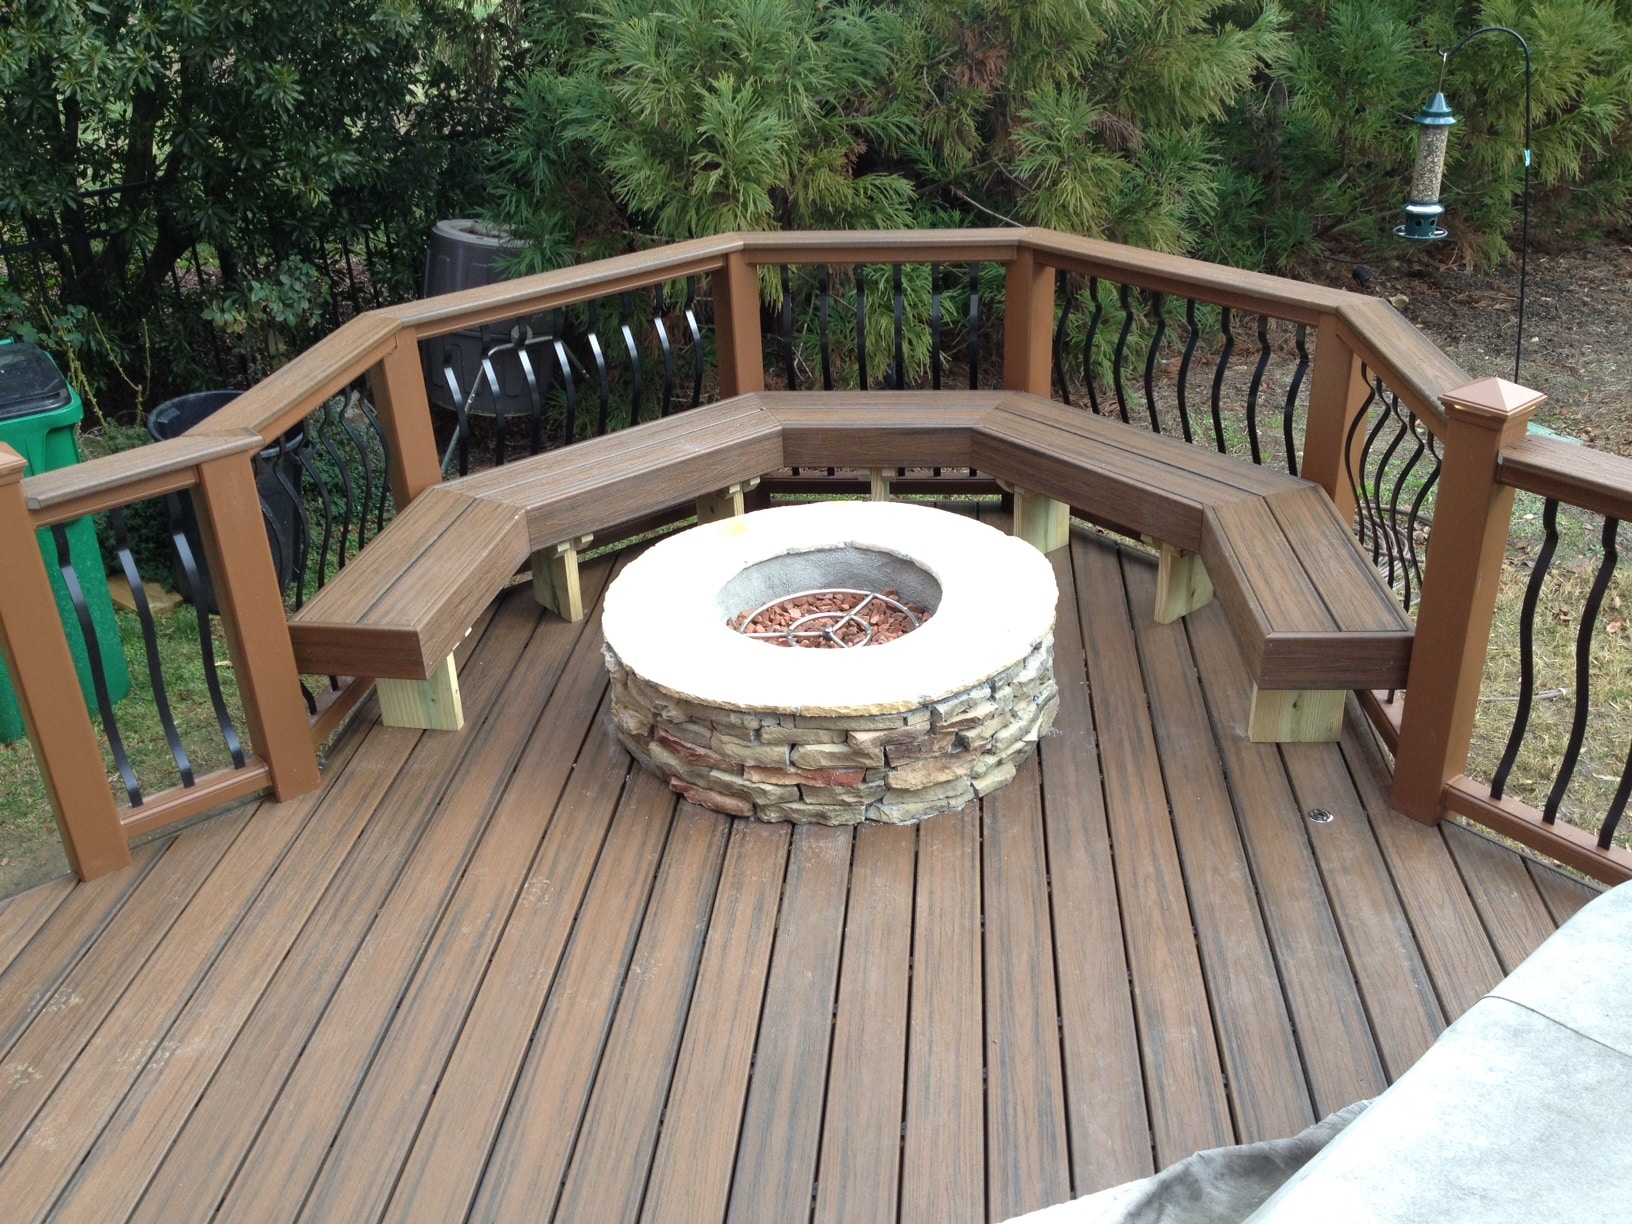 Wood Burning Fire Pits For Decks  Knobs Ideas Site